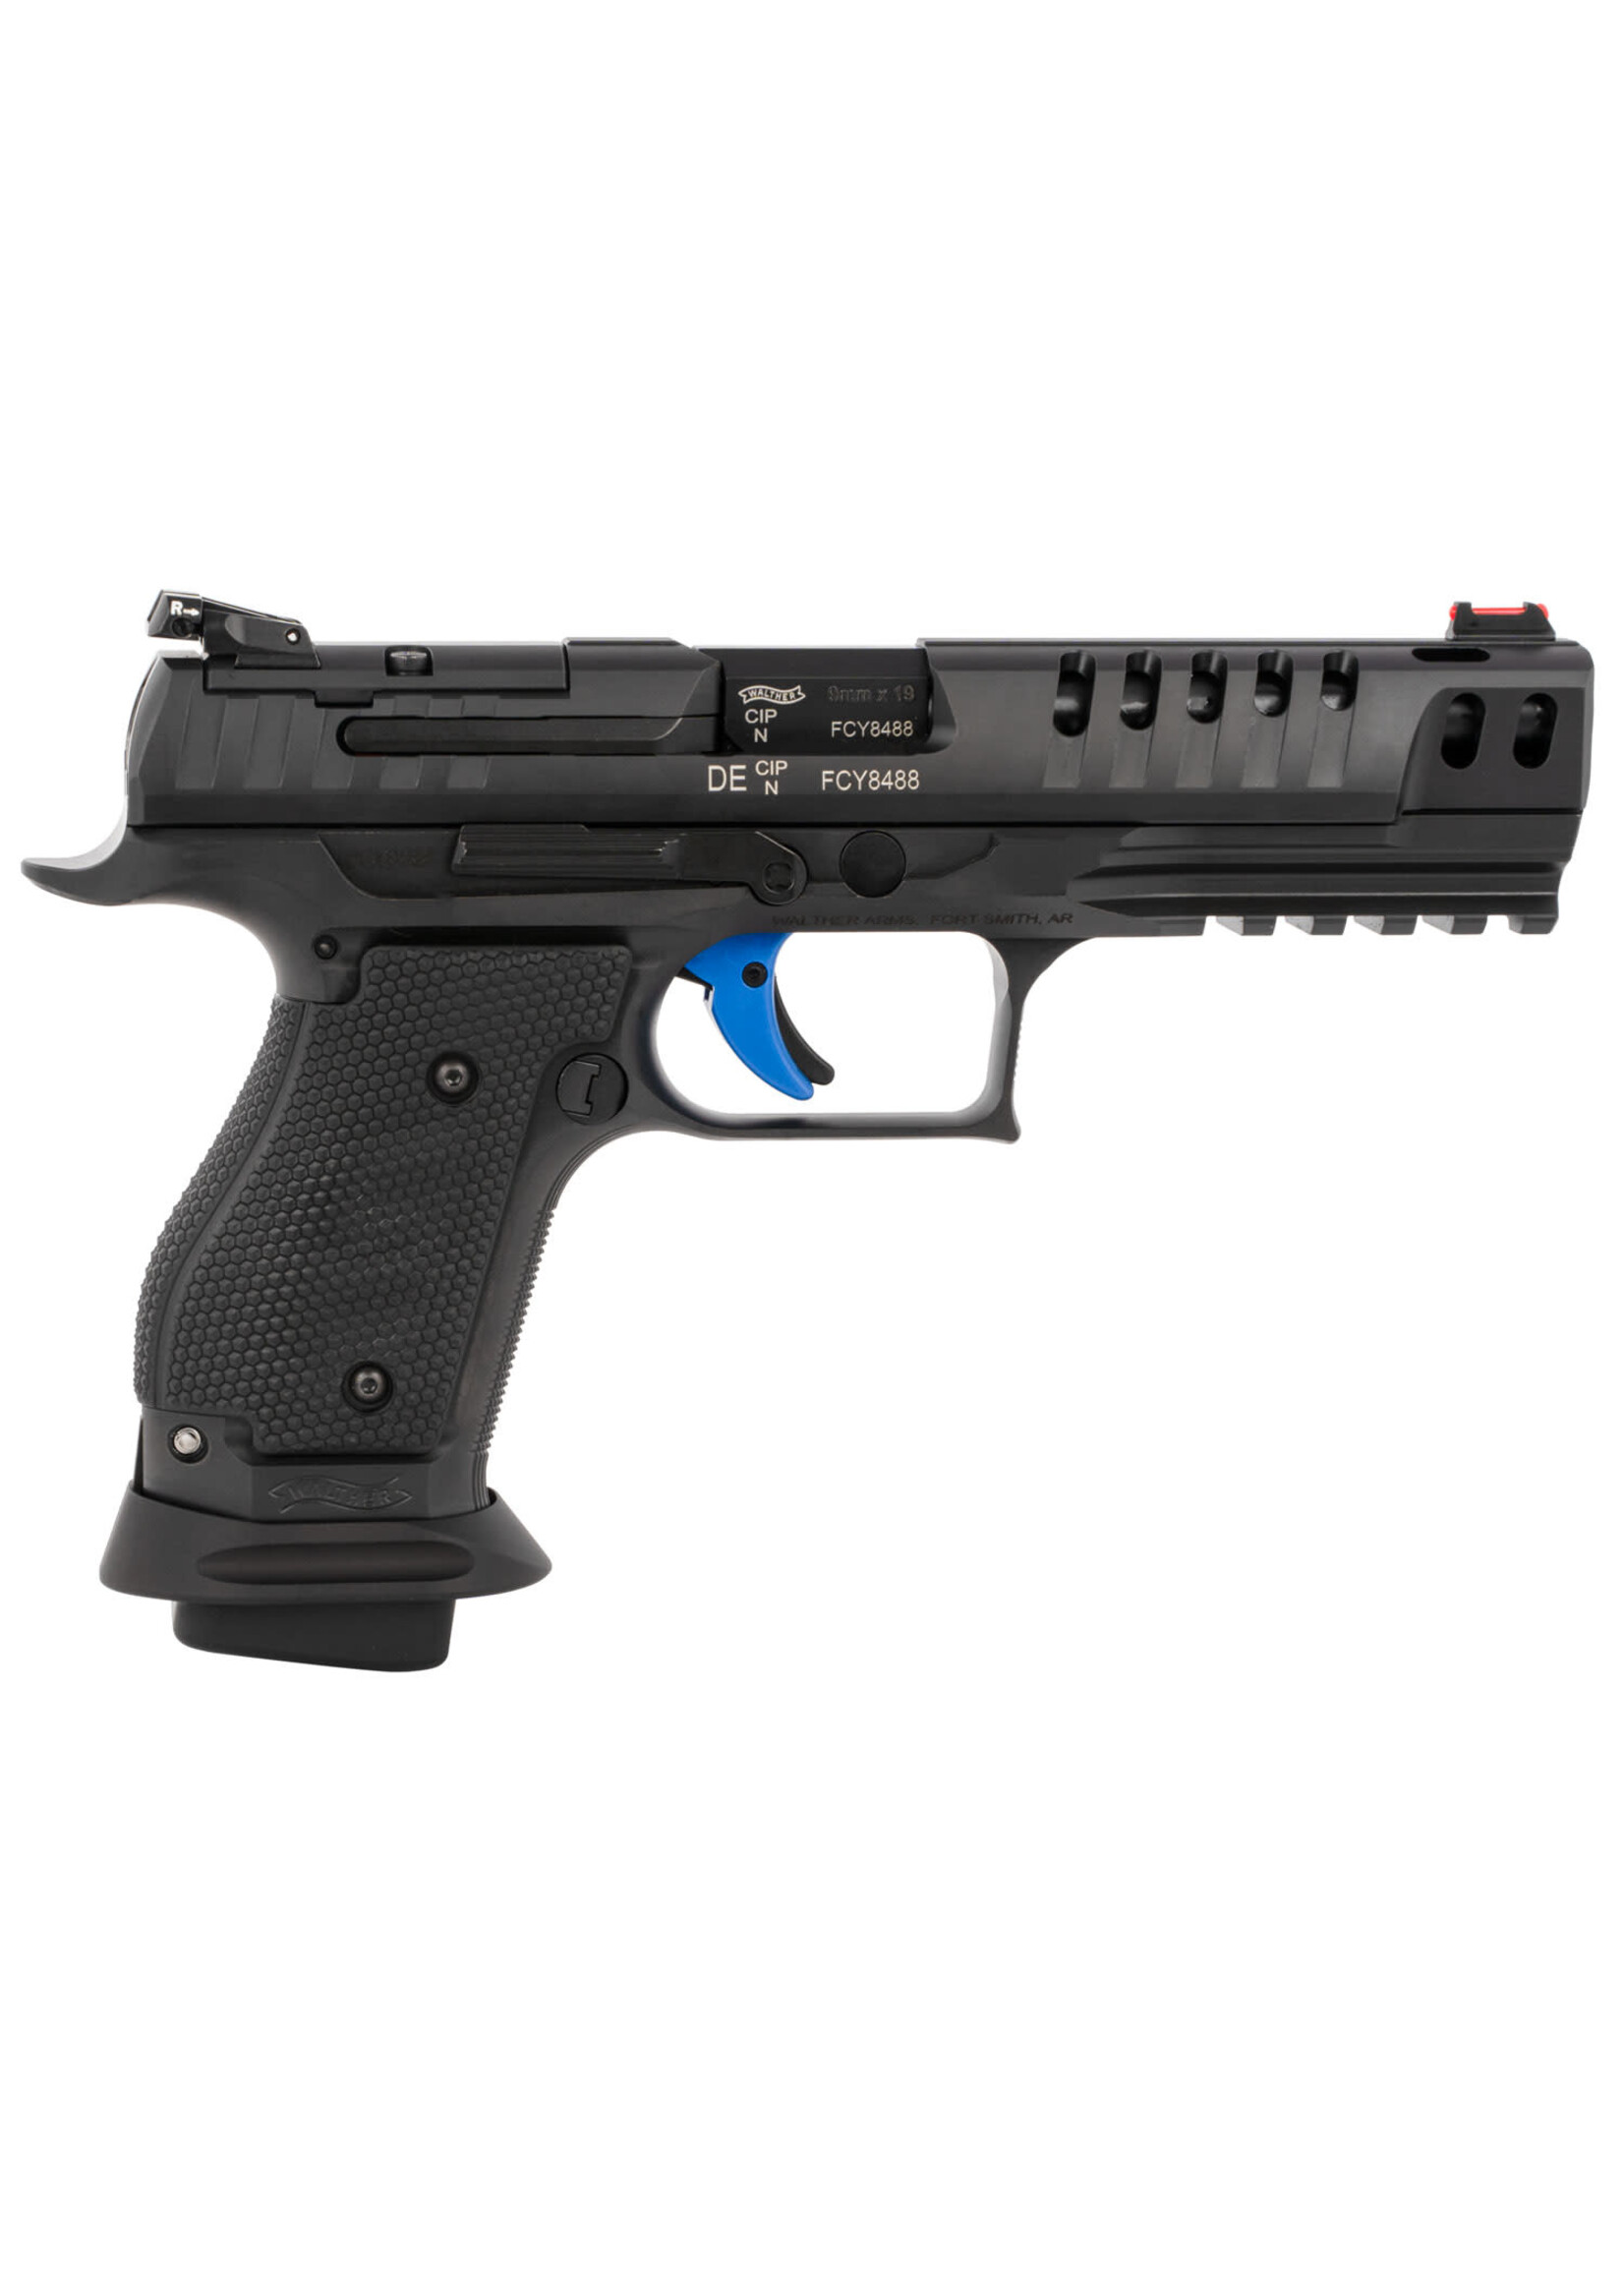 Walther Walther Arms 2846951 PPQ M2 Q5 Match Pro 9mm Luger Caliber with 5" Barrel, 17+1 Capacity, Black Finish Steel Picatinny Rail/Beavertail Frame, Serrated/Optic Cut Matte Black Tenifer Steel Ported Slide & Wraparound Ergonomic Grip